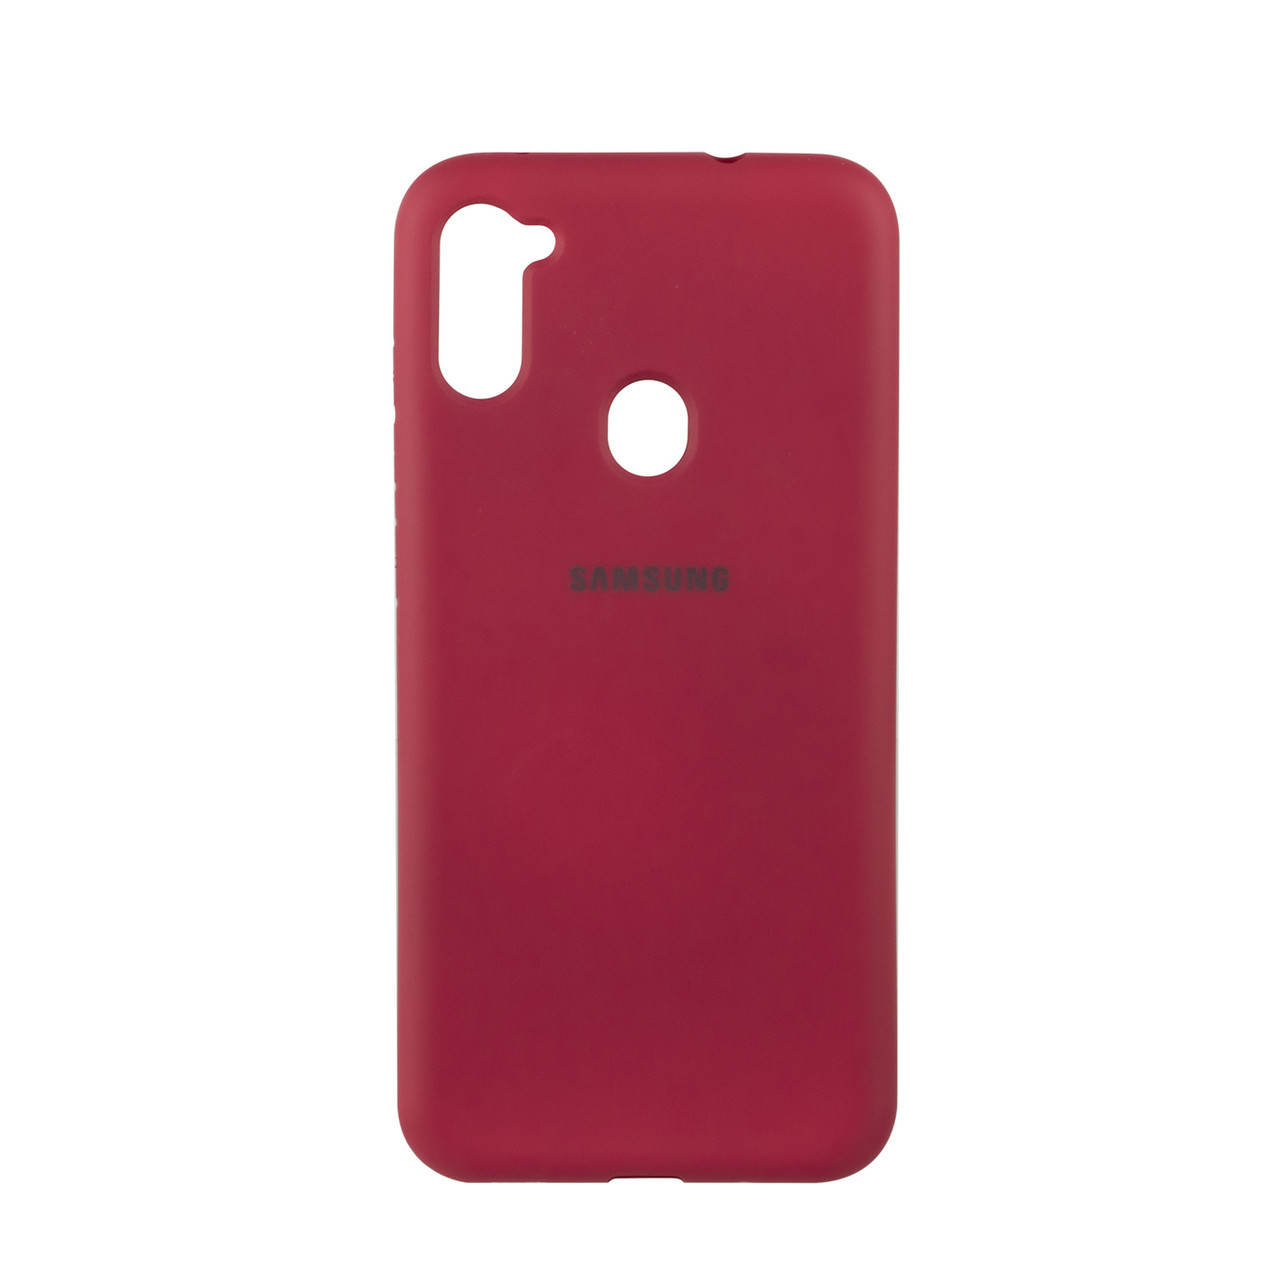 Чехол для Samsung Galaxy A11 back cover Silky and soft-touch Silicone Cover OEM, Bordo - фото 1 - id-p115054295